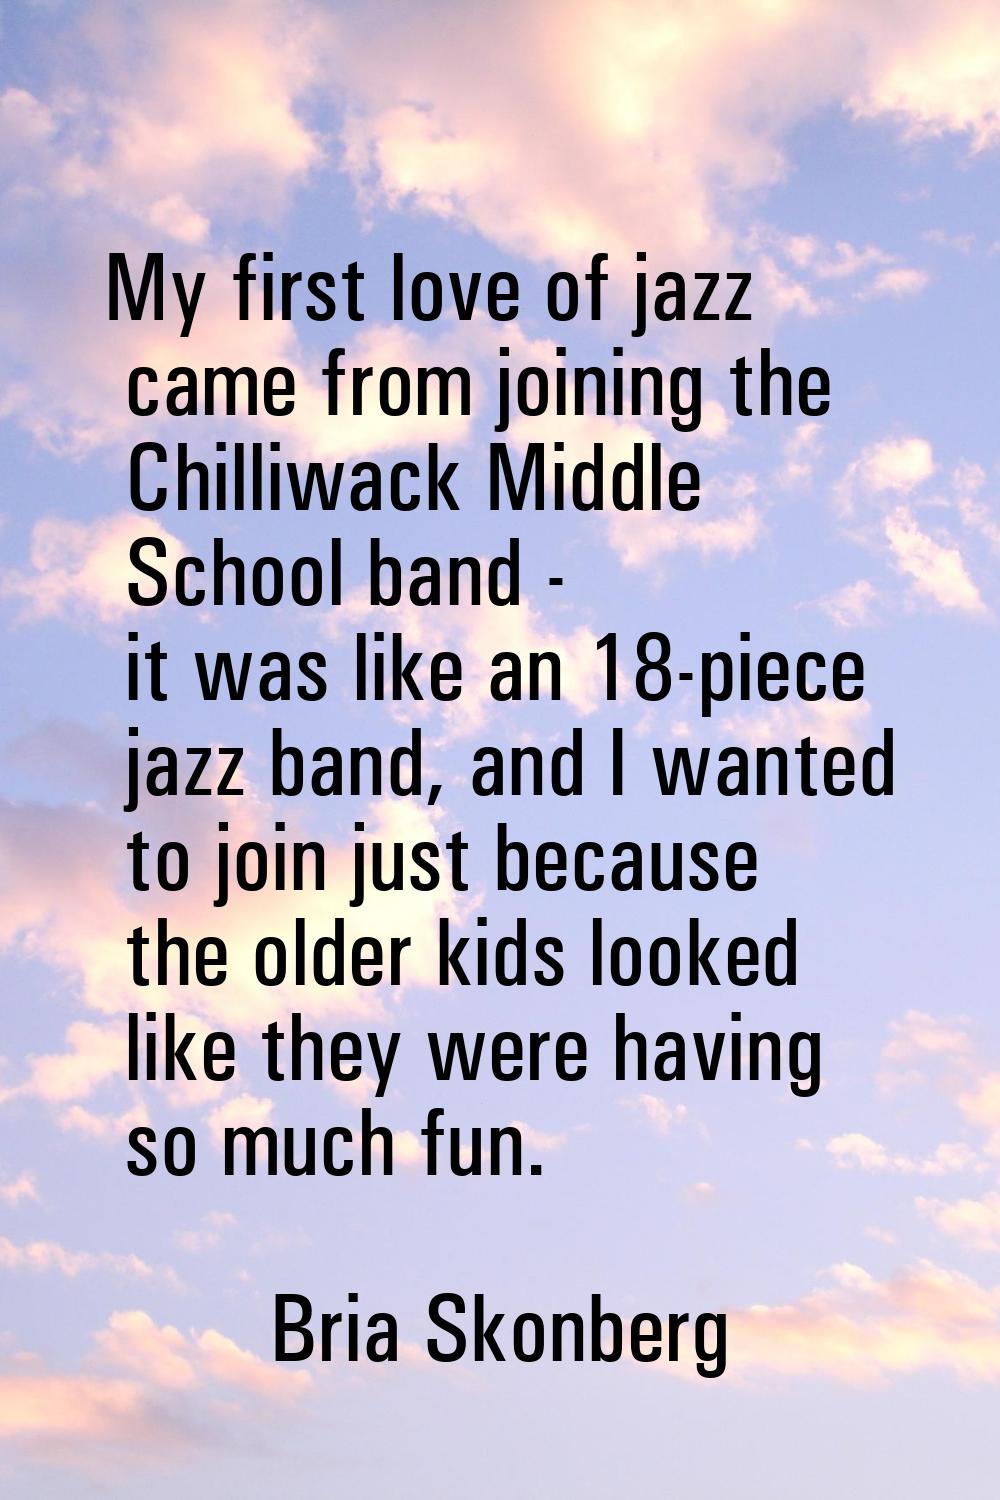 My first love of jazz came from joining the Chilliwack Middle School band - it was like an 18-piece